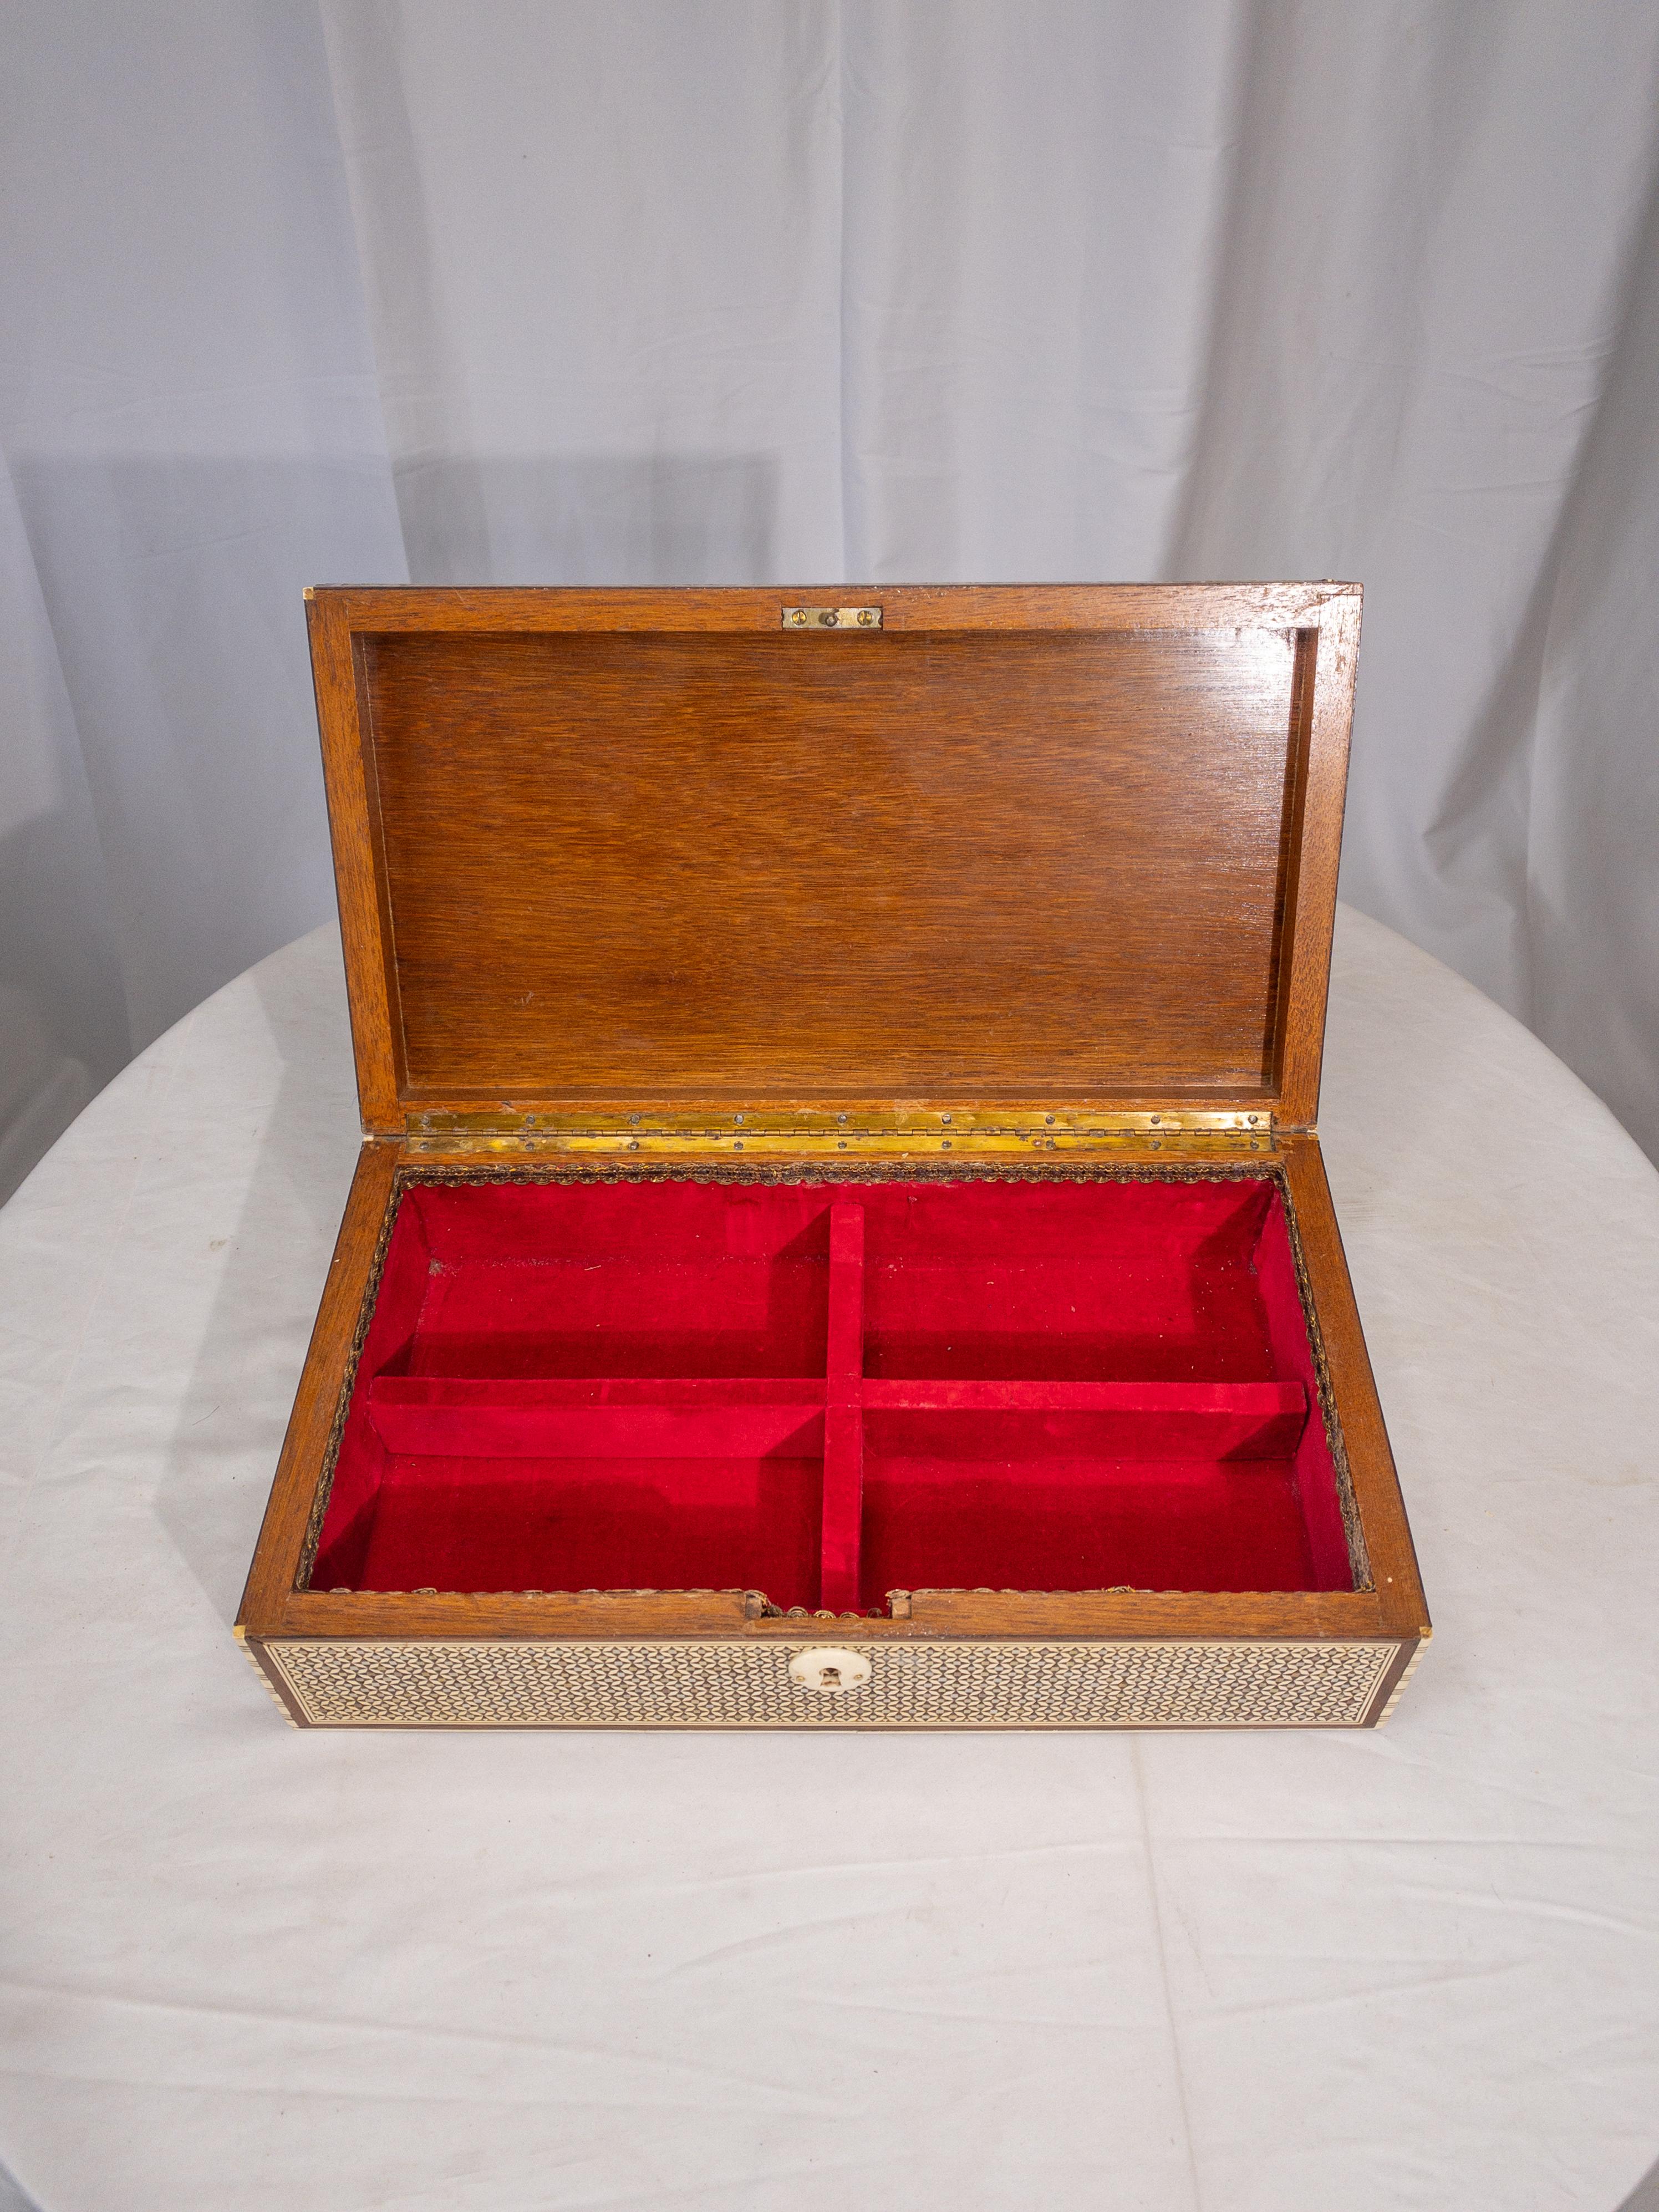 1920’s French Inlaid Anglo-Indian Style Jewelry Box For Sale 3